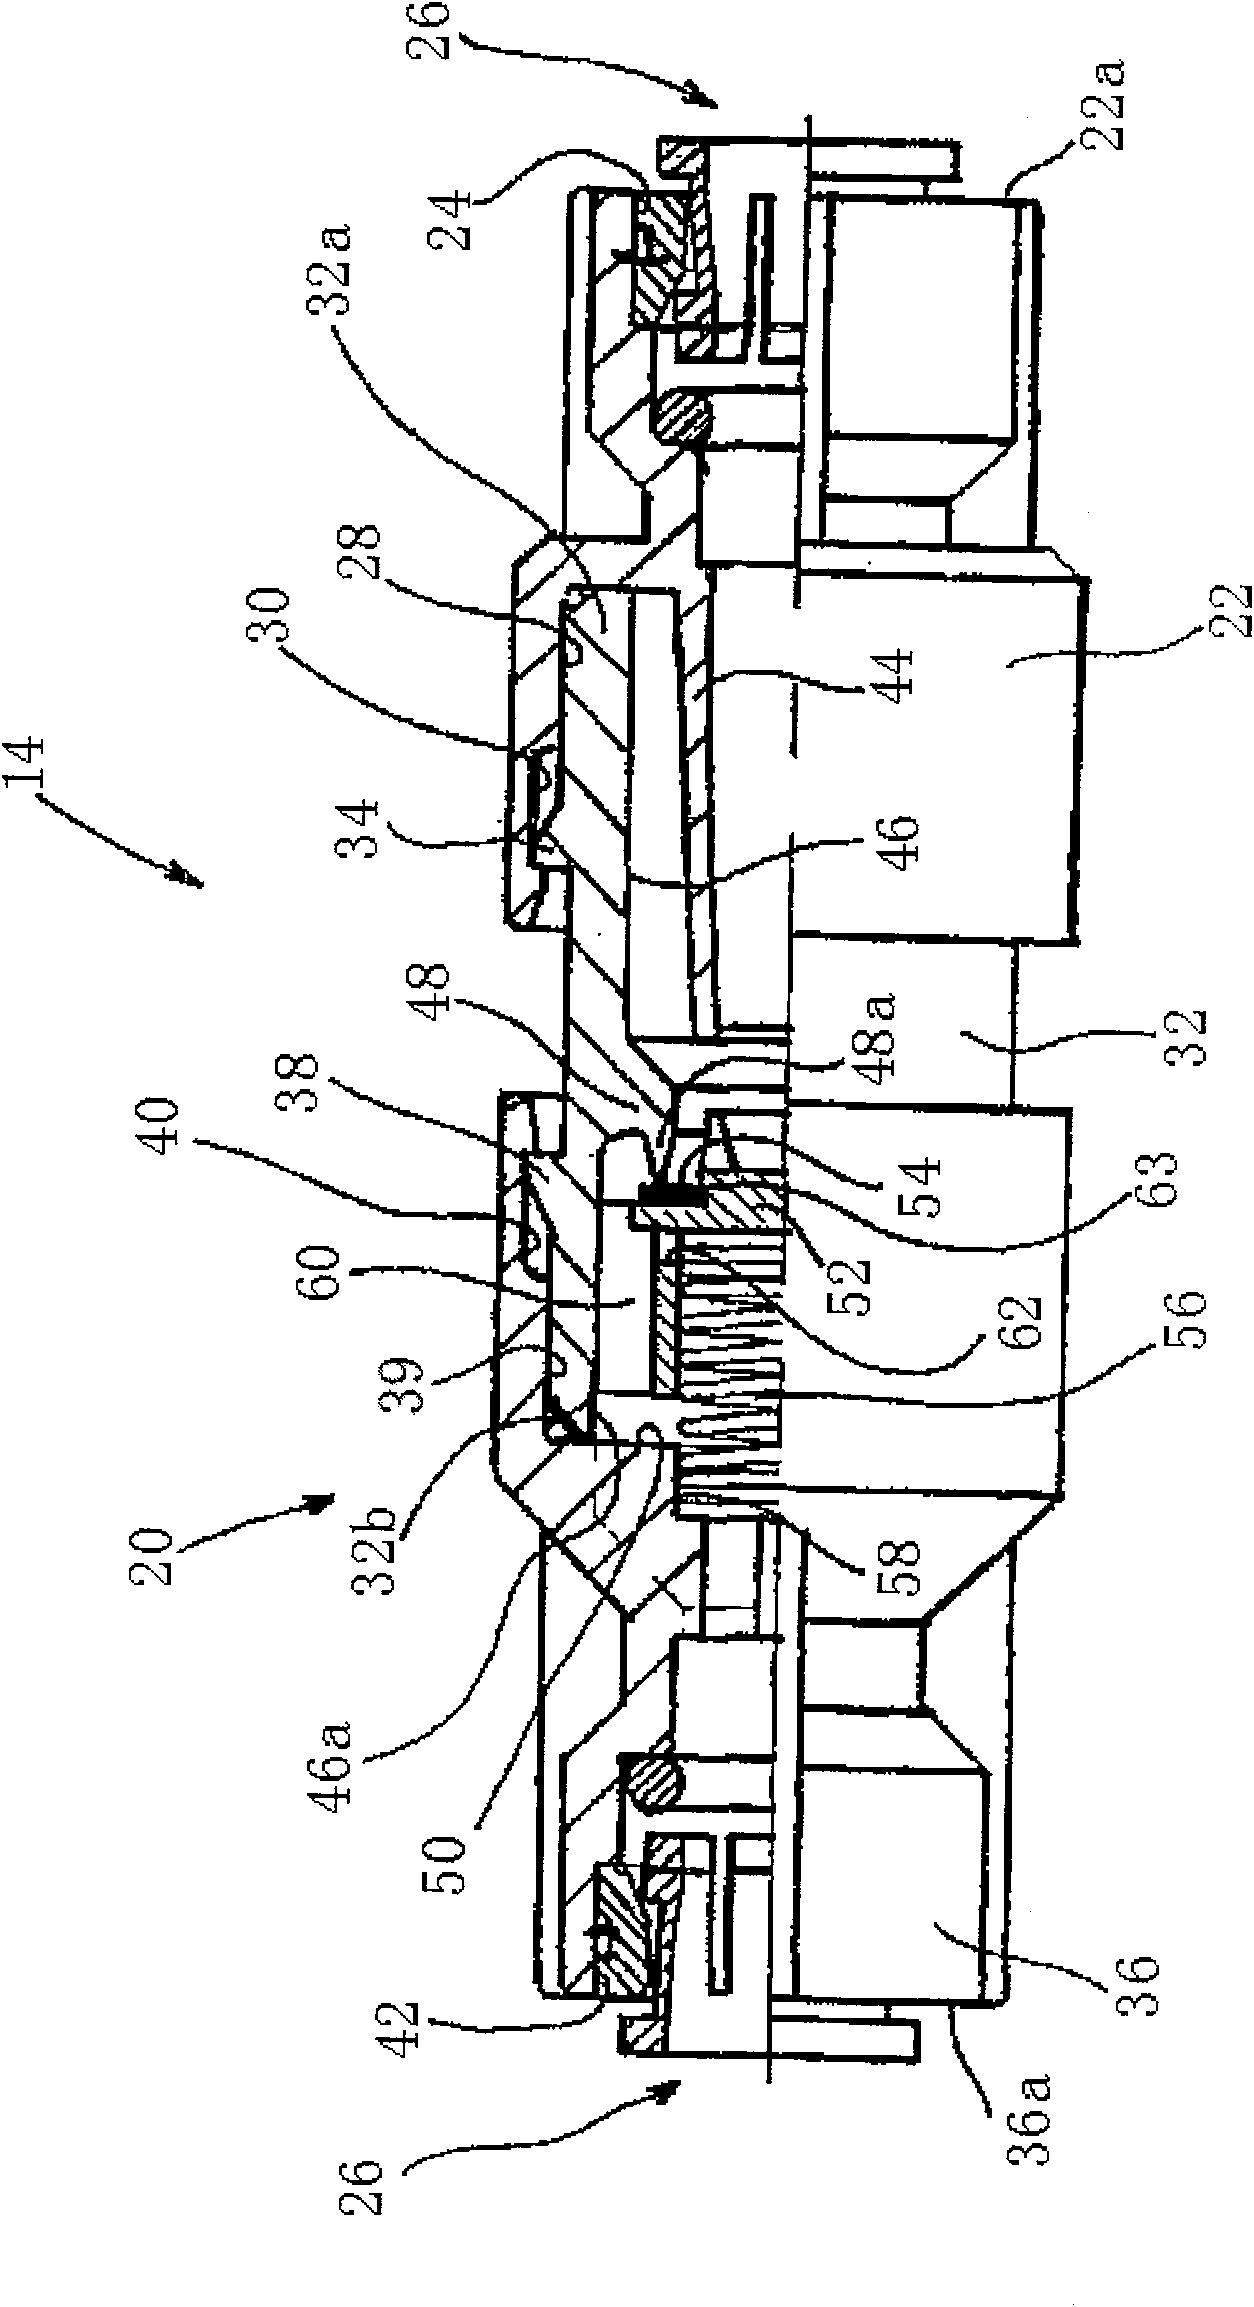 A fluid-dispensing circuit with check valves